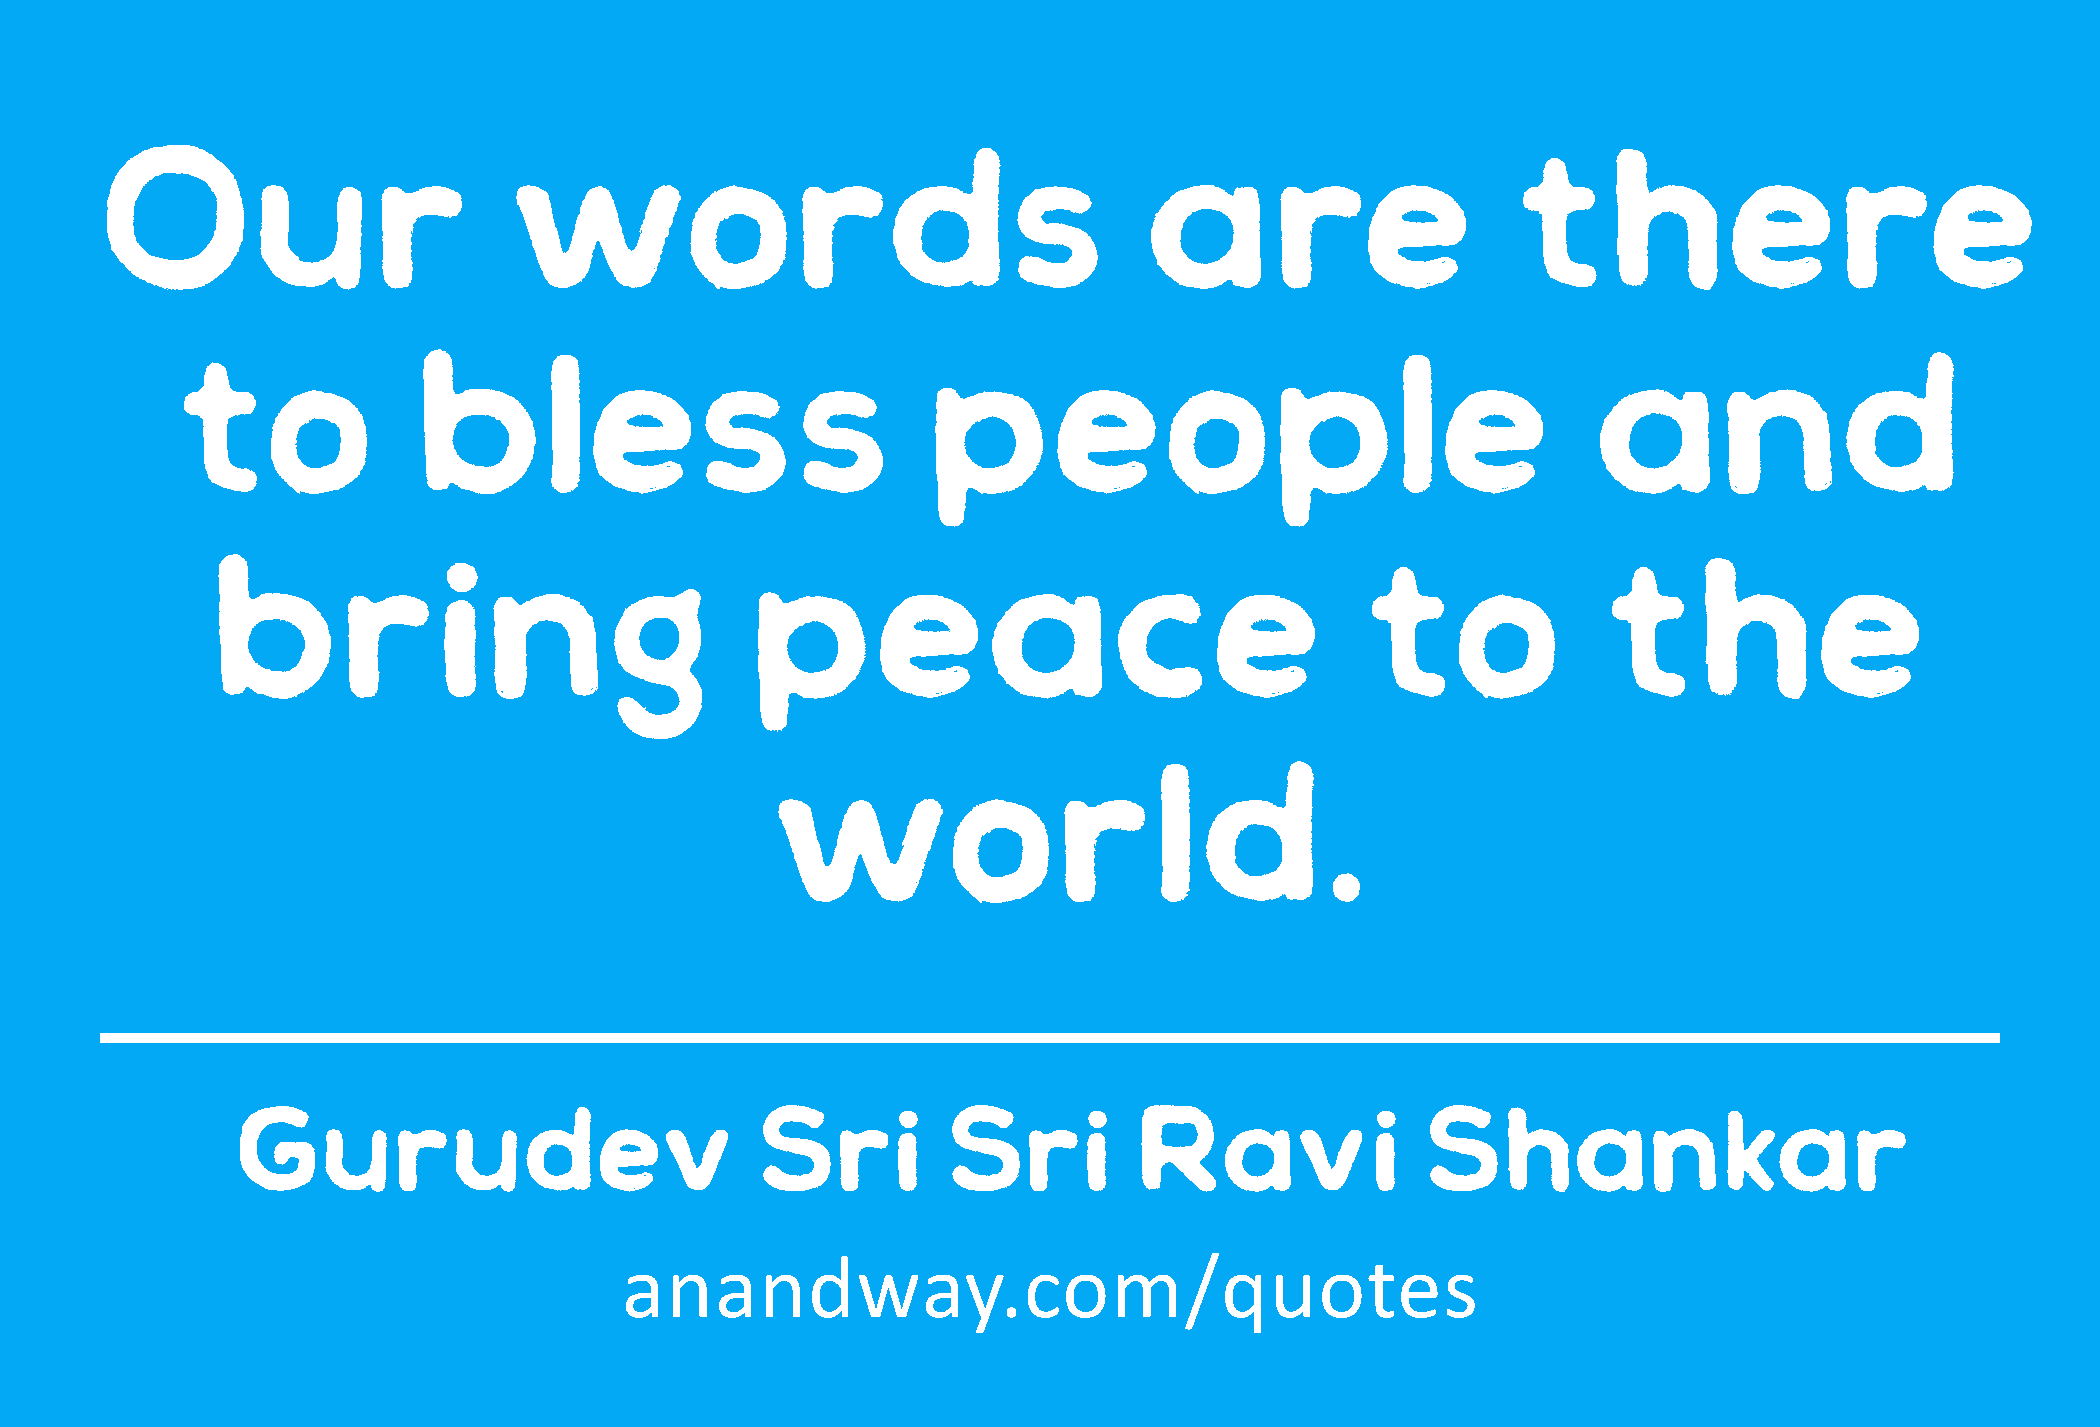 Our words are there to bless people and bring peace to the world. 
 -Gurudev Sri Sri Ravi Shankar